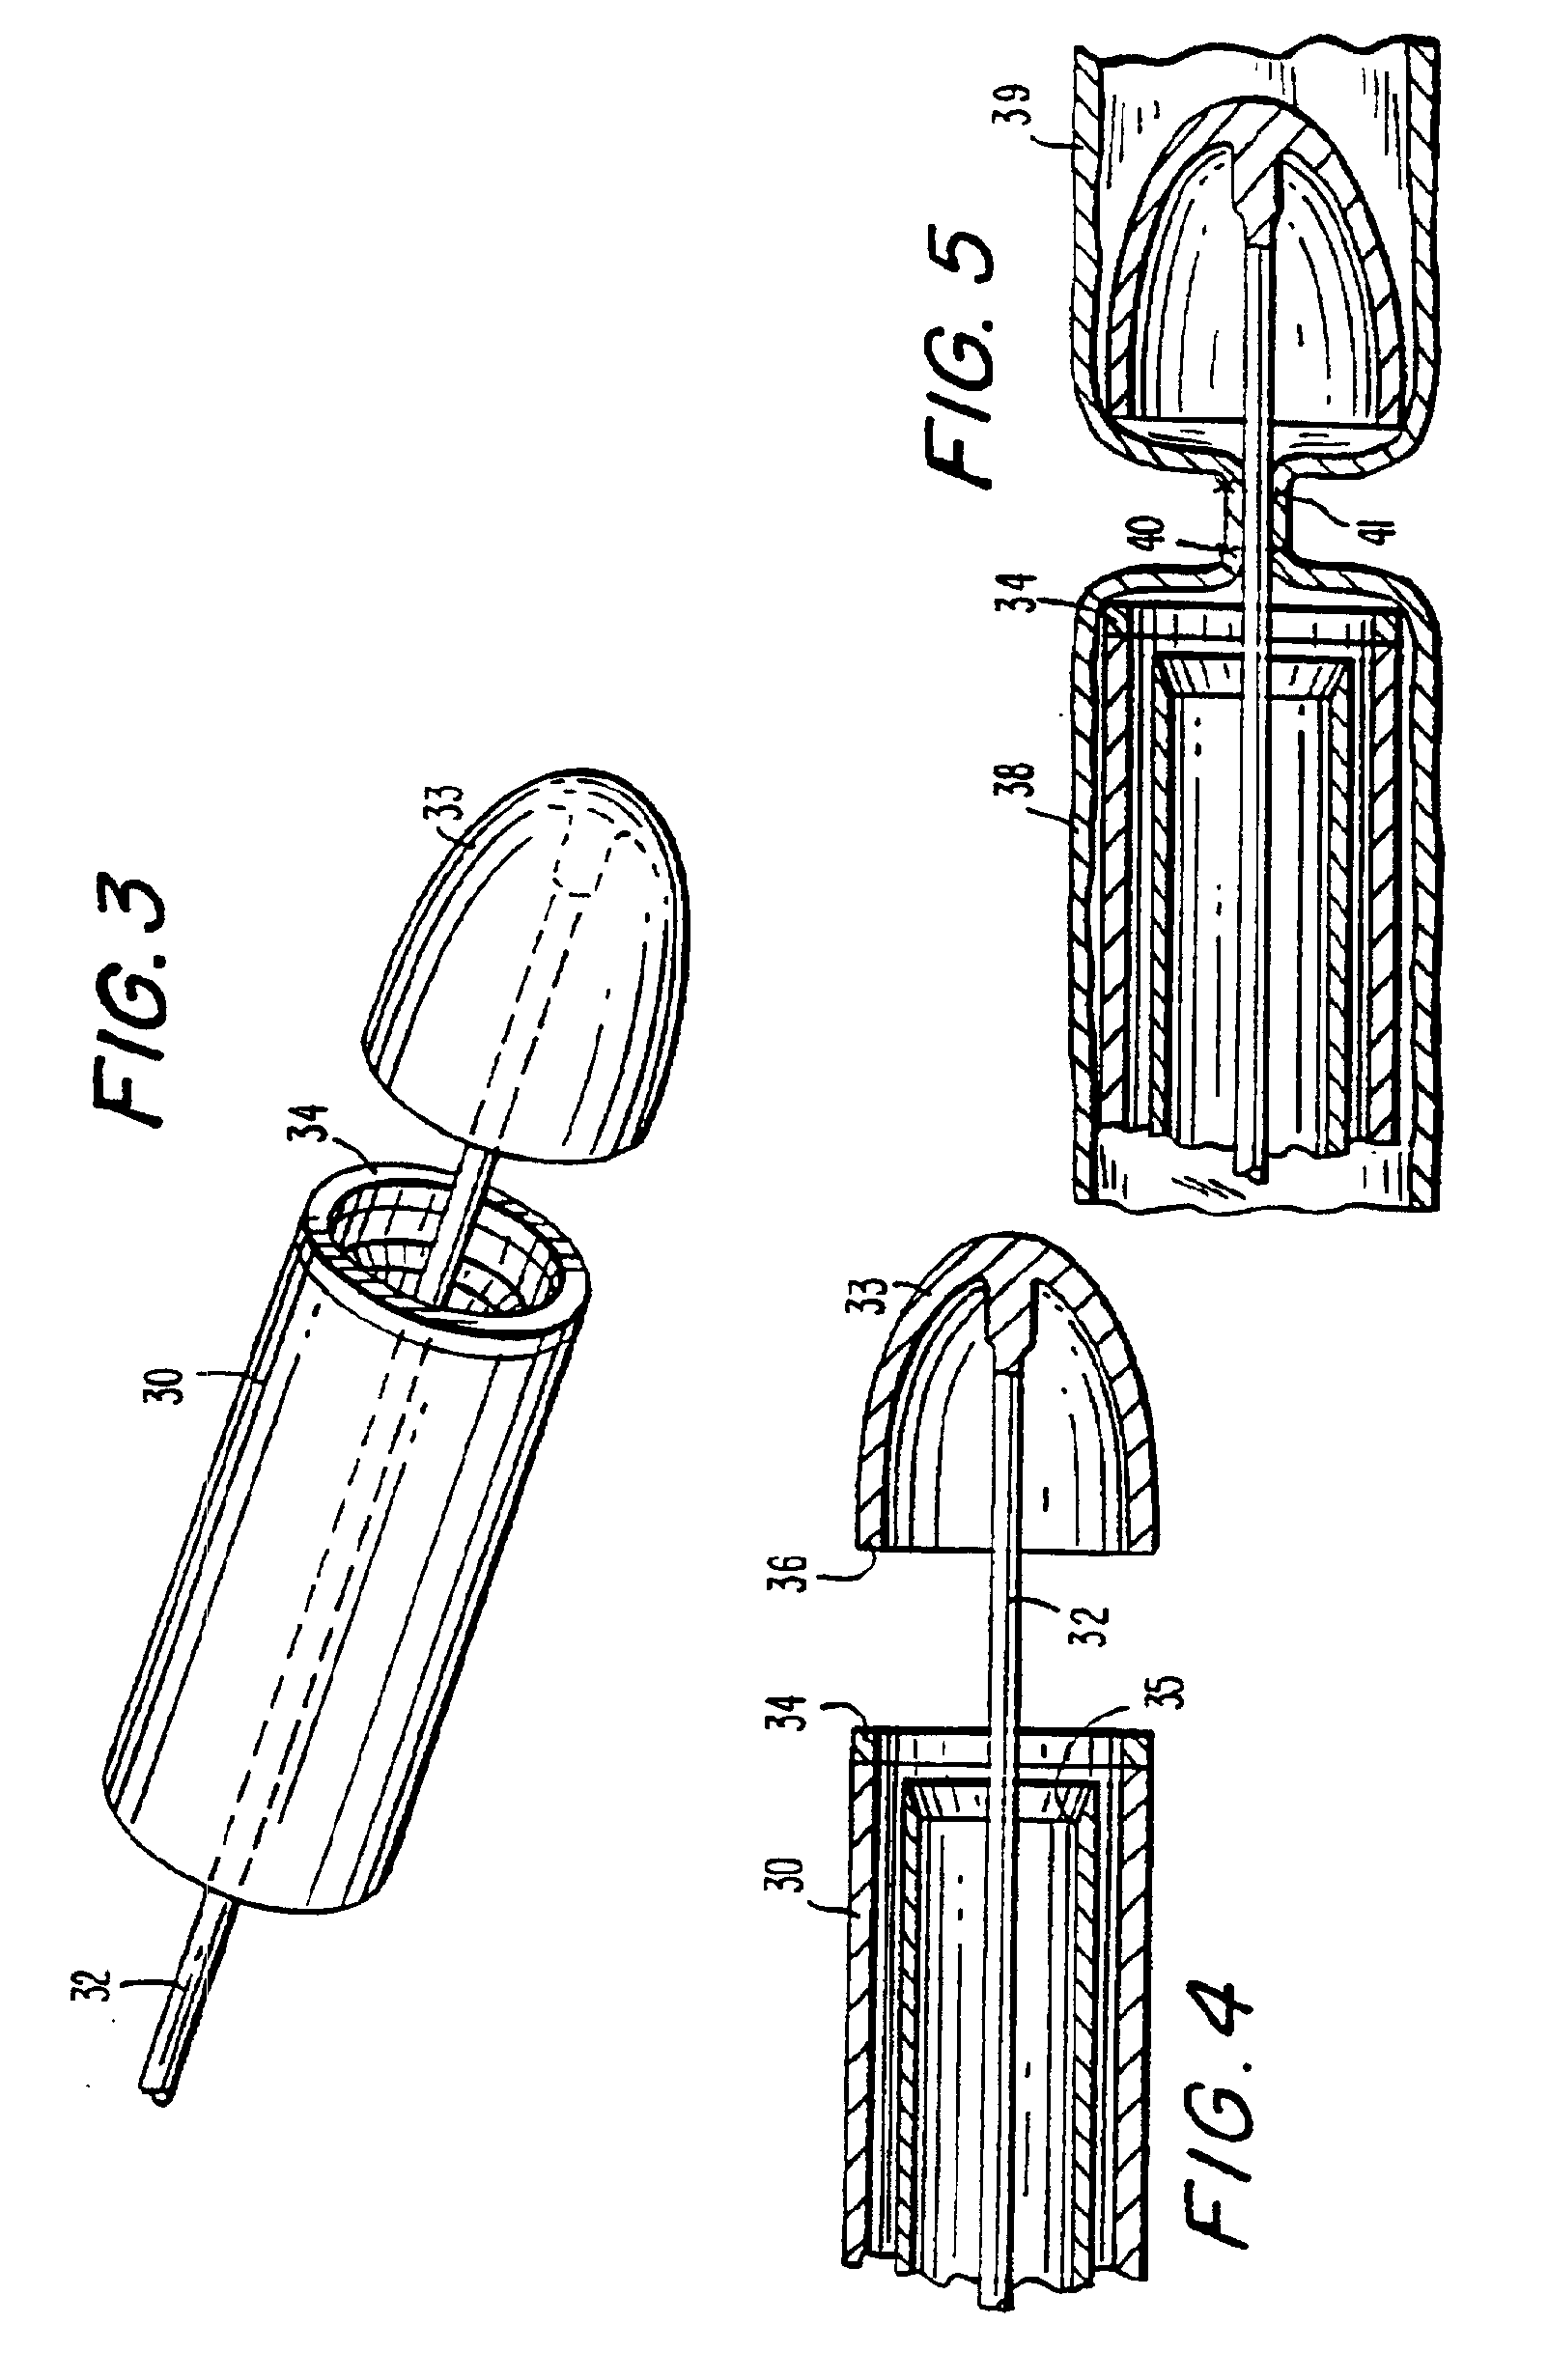 Electrothermal device for coagulating, sealing and cutting tissue during surgery